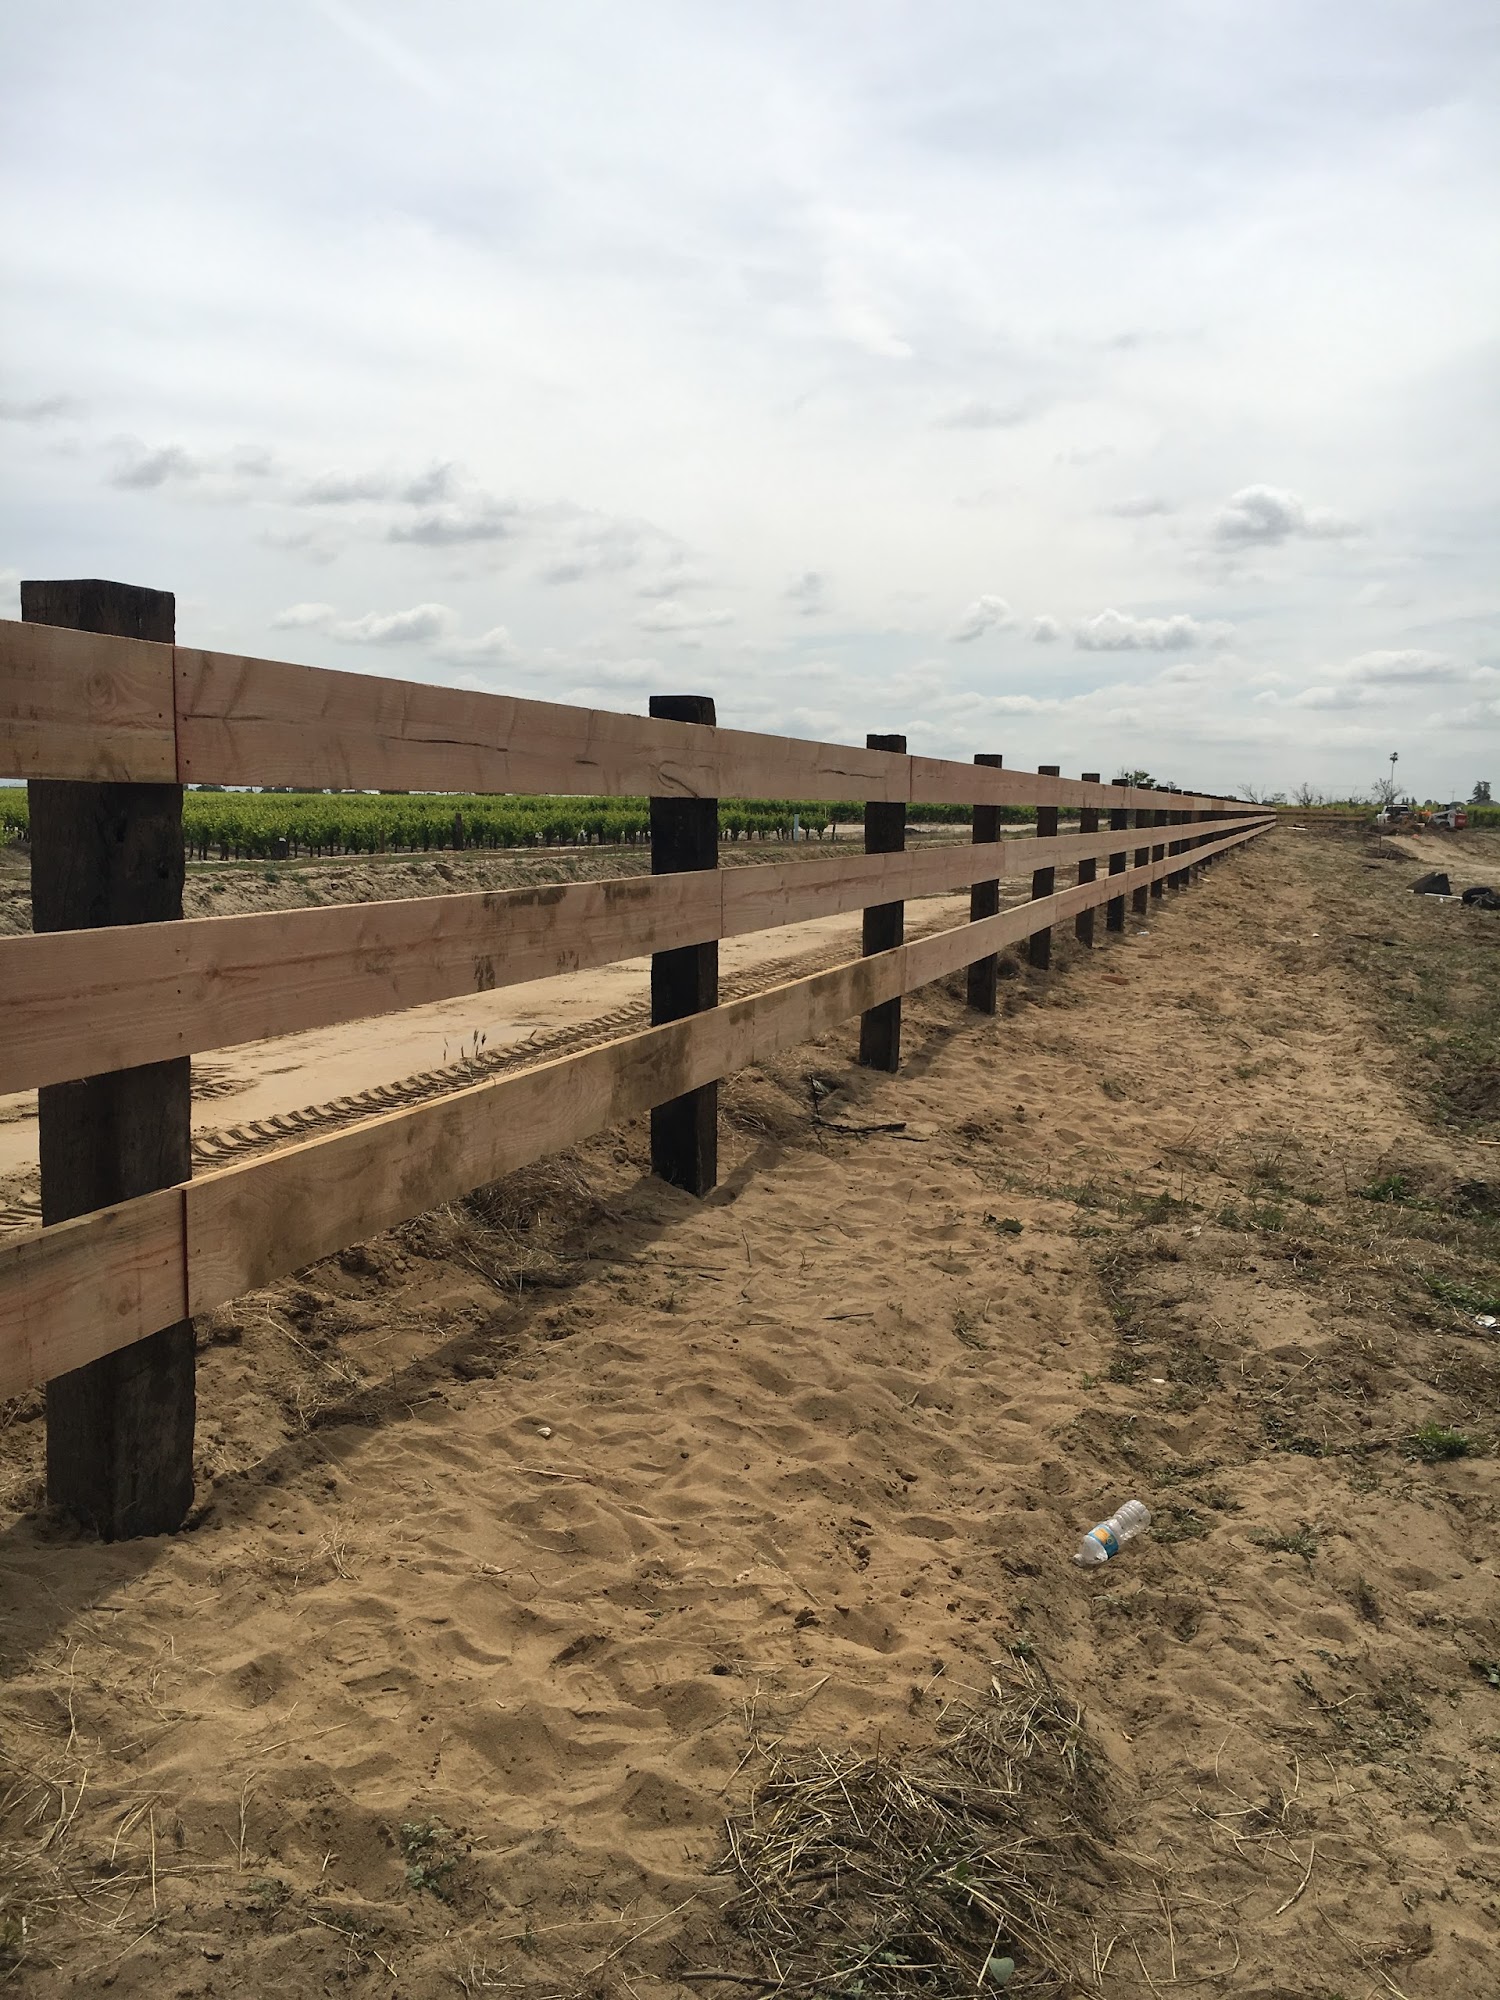 Sanger Fence Company, Inc. 1848 Industrial Way, Sanger California 93657